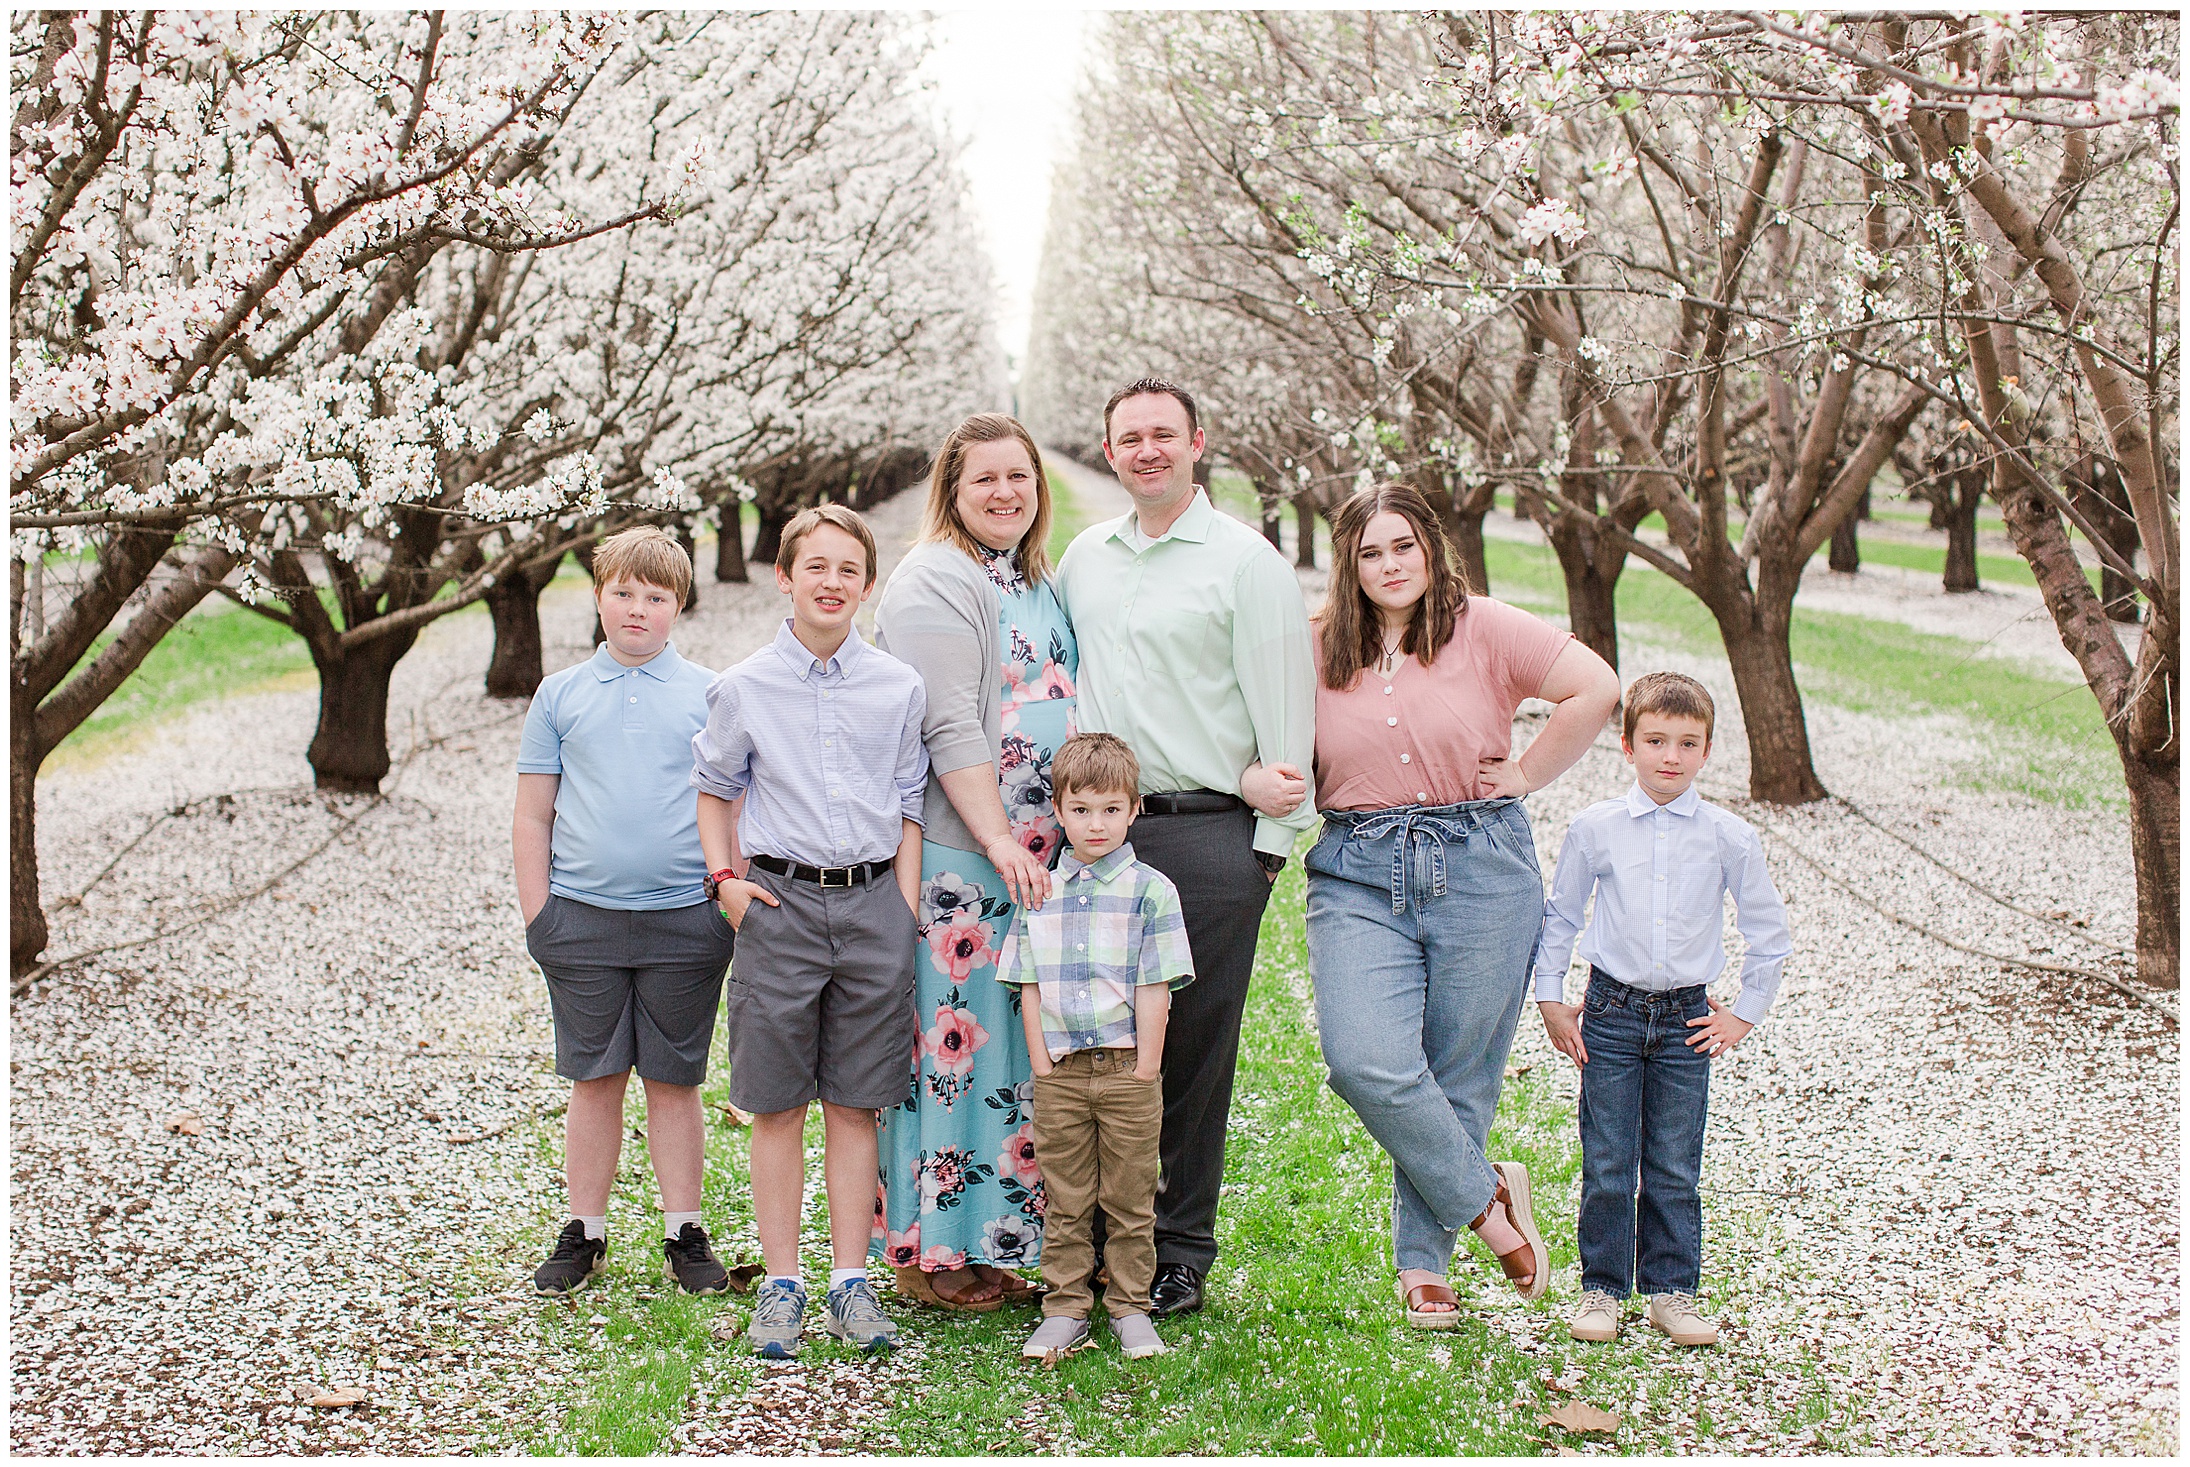 Spring Almond Blossoms Family Session Chico California Soft Pastels,